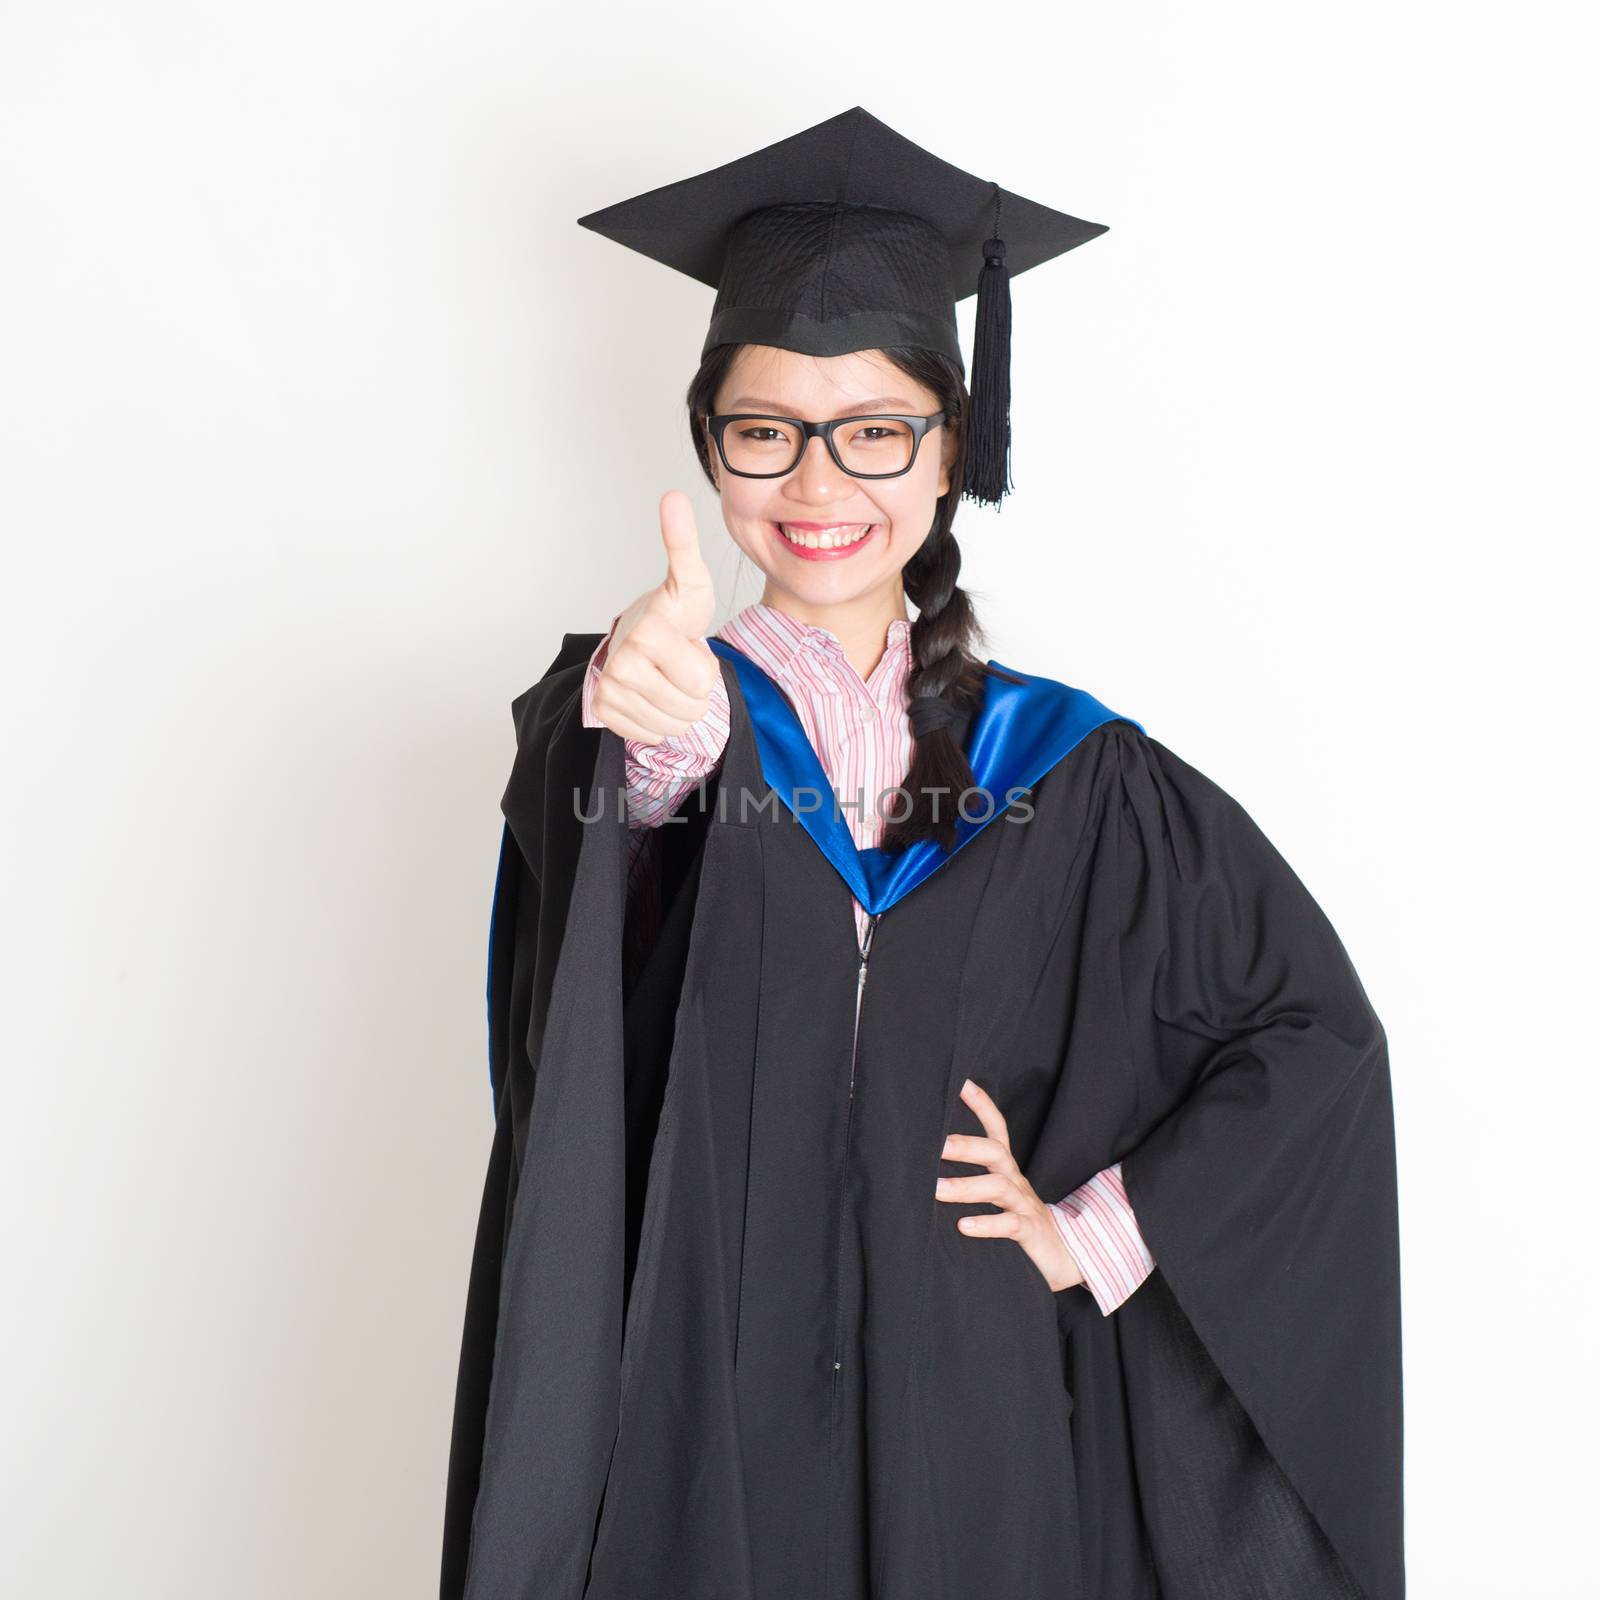 University student in graduation gown and cap giving thumb up sign. Portrait of east  Asian female model standing on plain background.